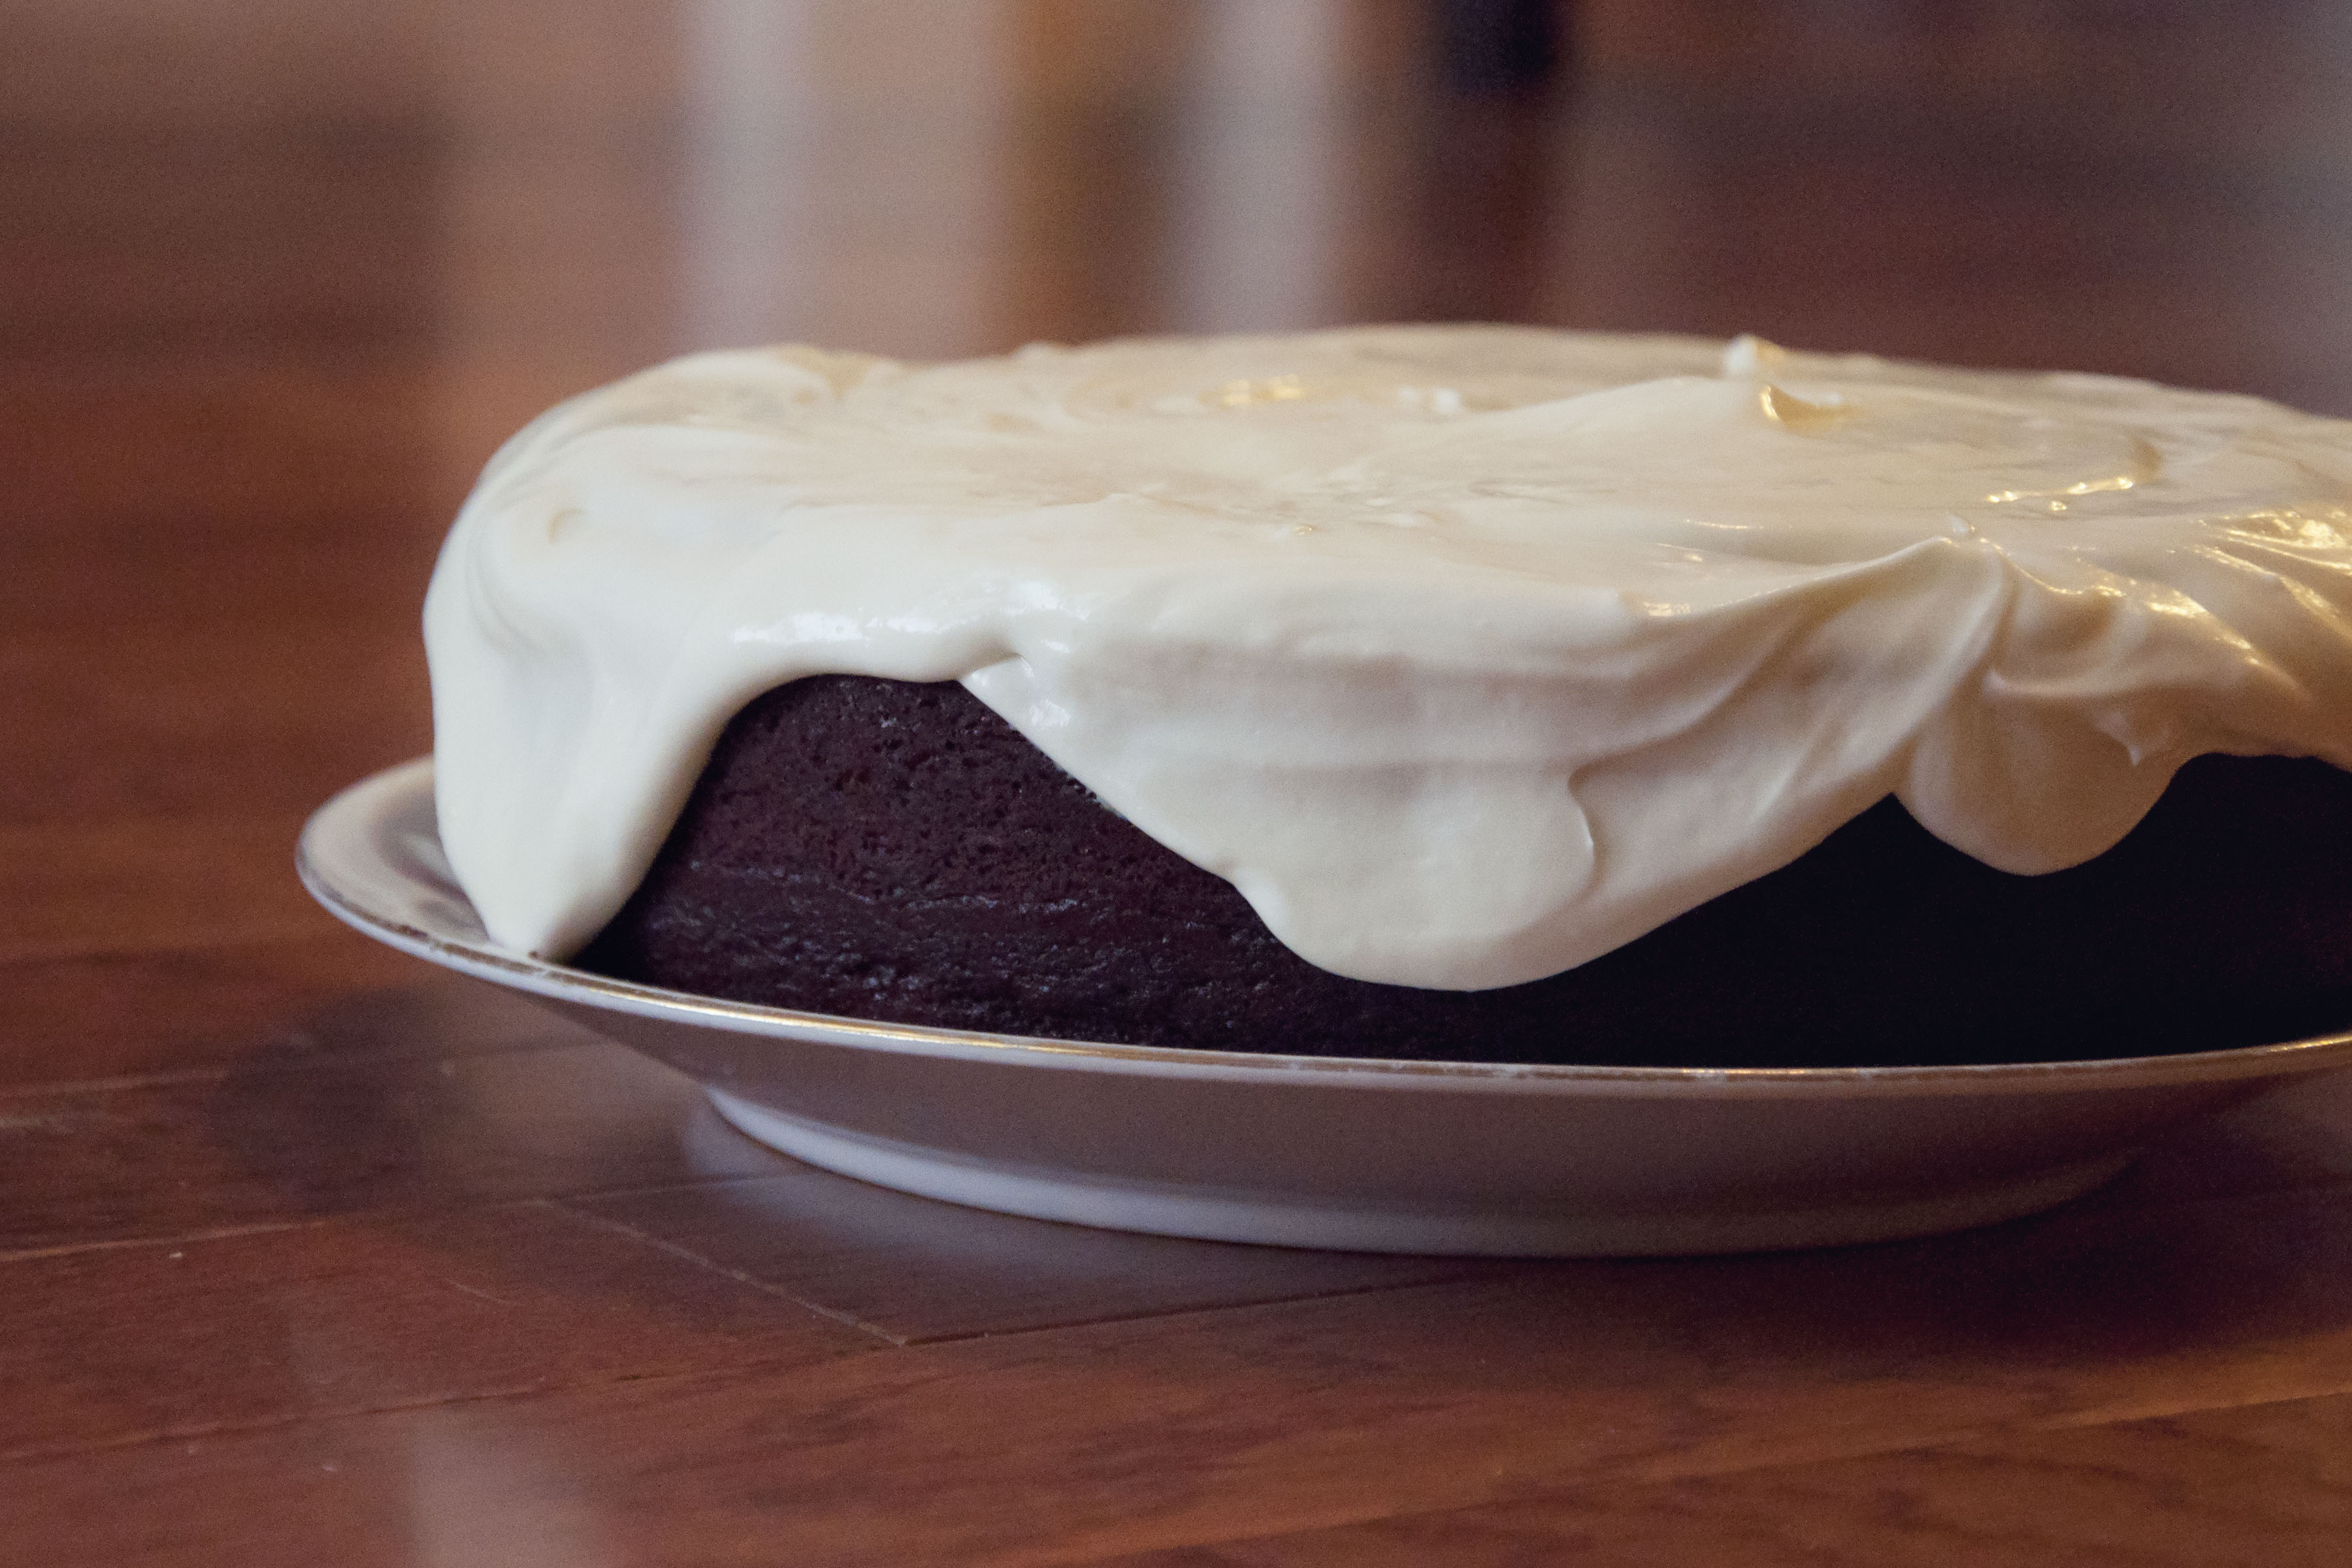 St. Patrick's Day Recipe, St. Patrick's Day, Beer, Guinness, Chocolate Cake, Cream Cheese Frosting, Cooking with Beer,